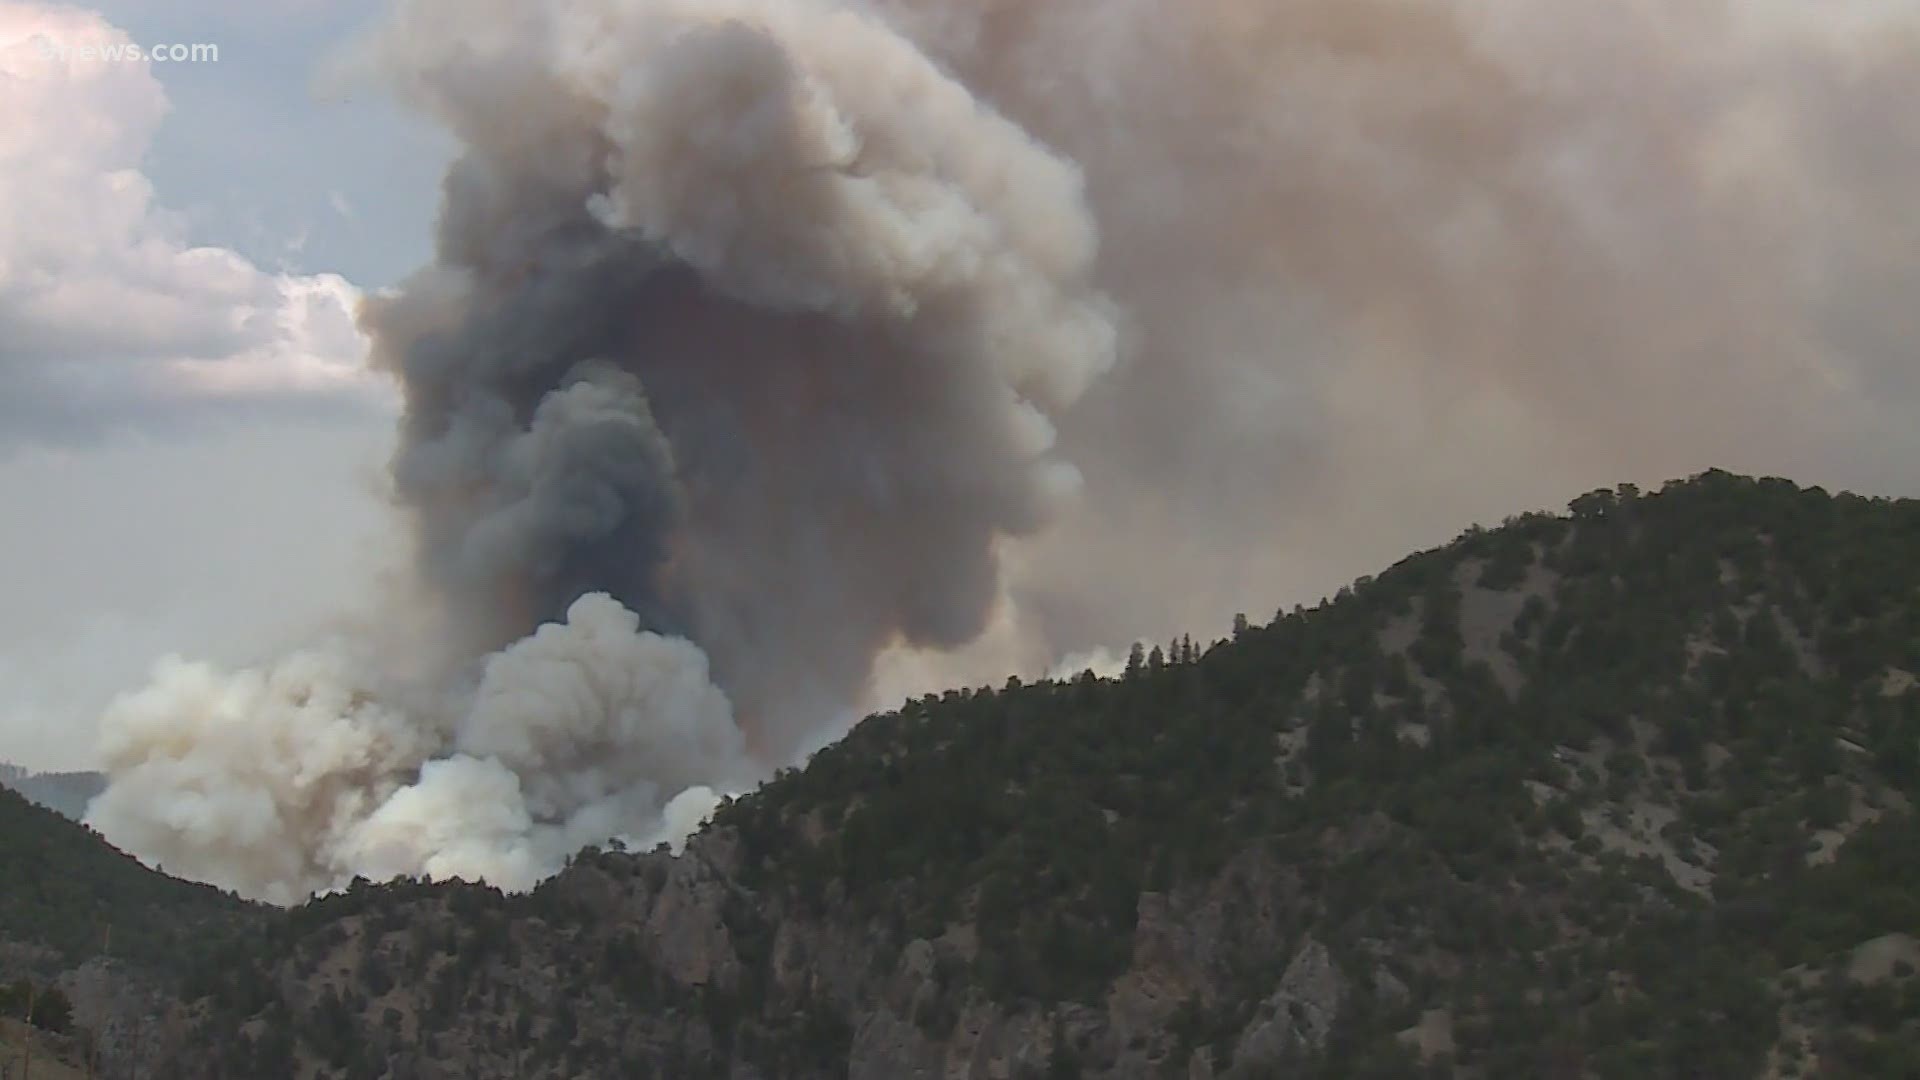 Hot, dry conditions and gusty afternoon winds created erratic fire behavior Wednesday.